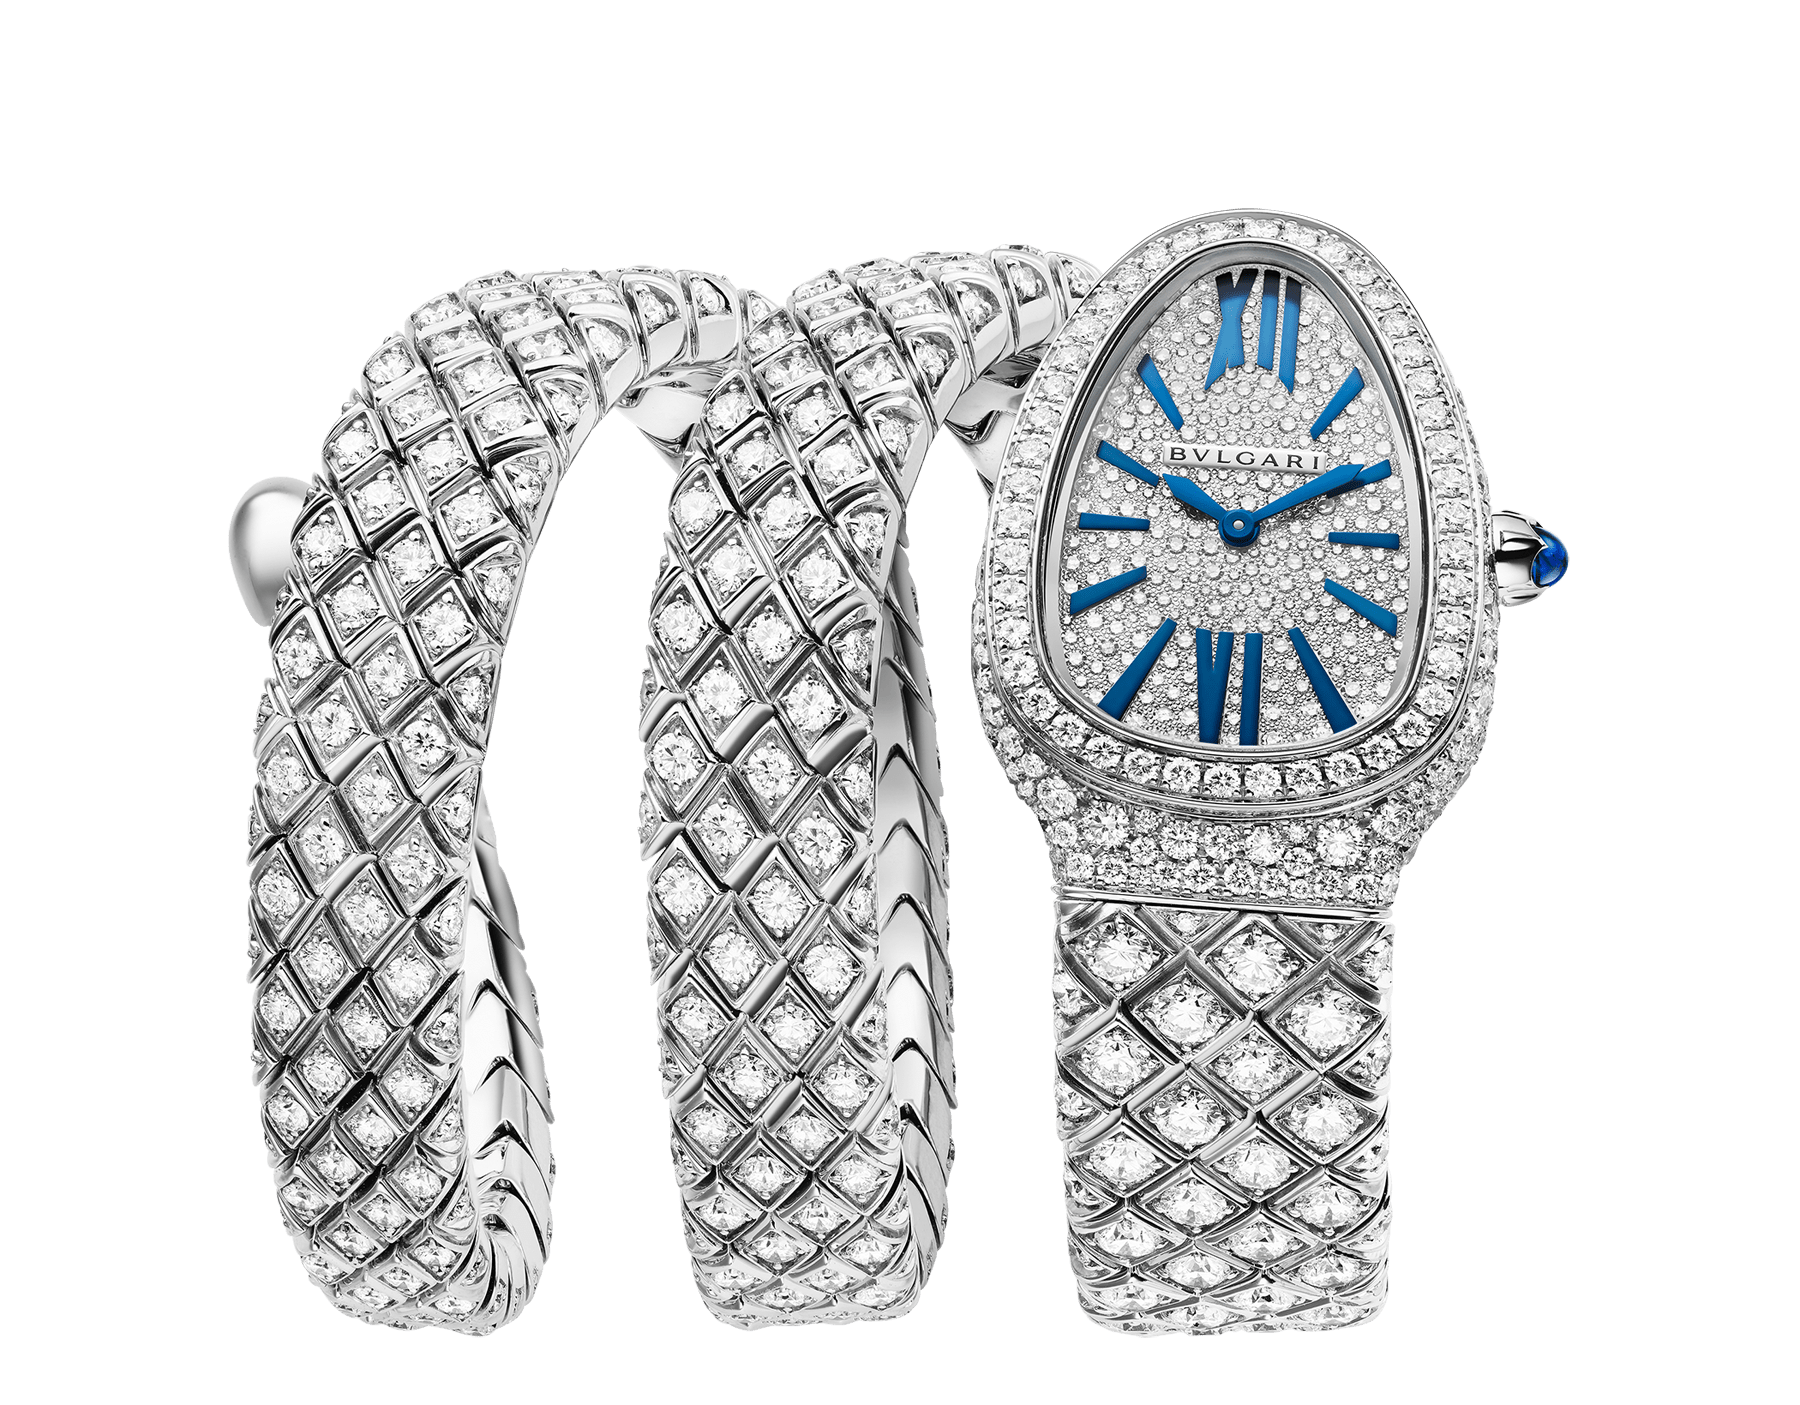 Serpenti Spiga High Jewelry double-spiral watch in 18 kt white gold with diamond-set case, dial and bracelet. Water resistant up to 30 meters (100 feet) 103251 image 1